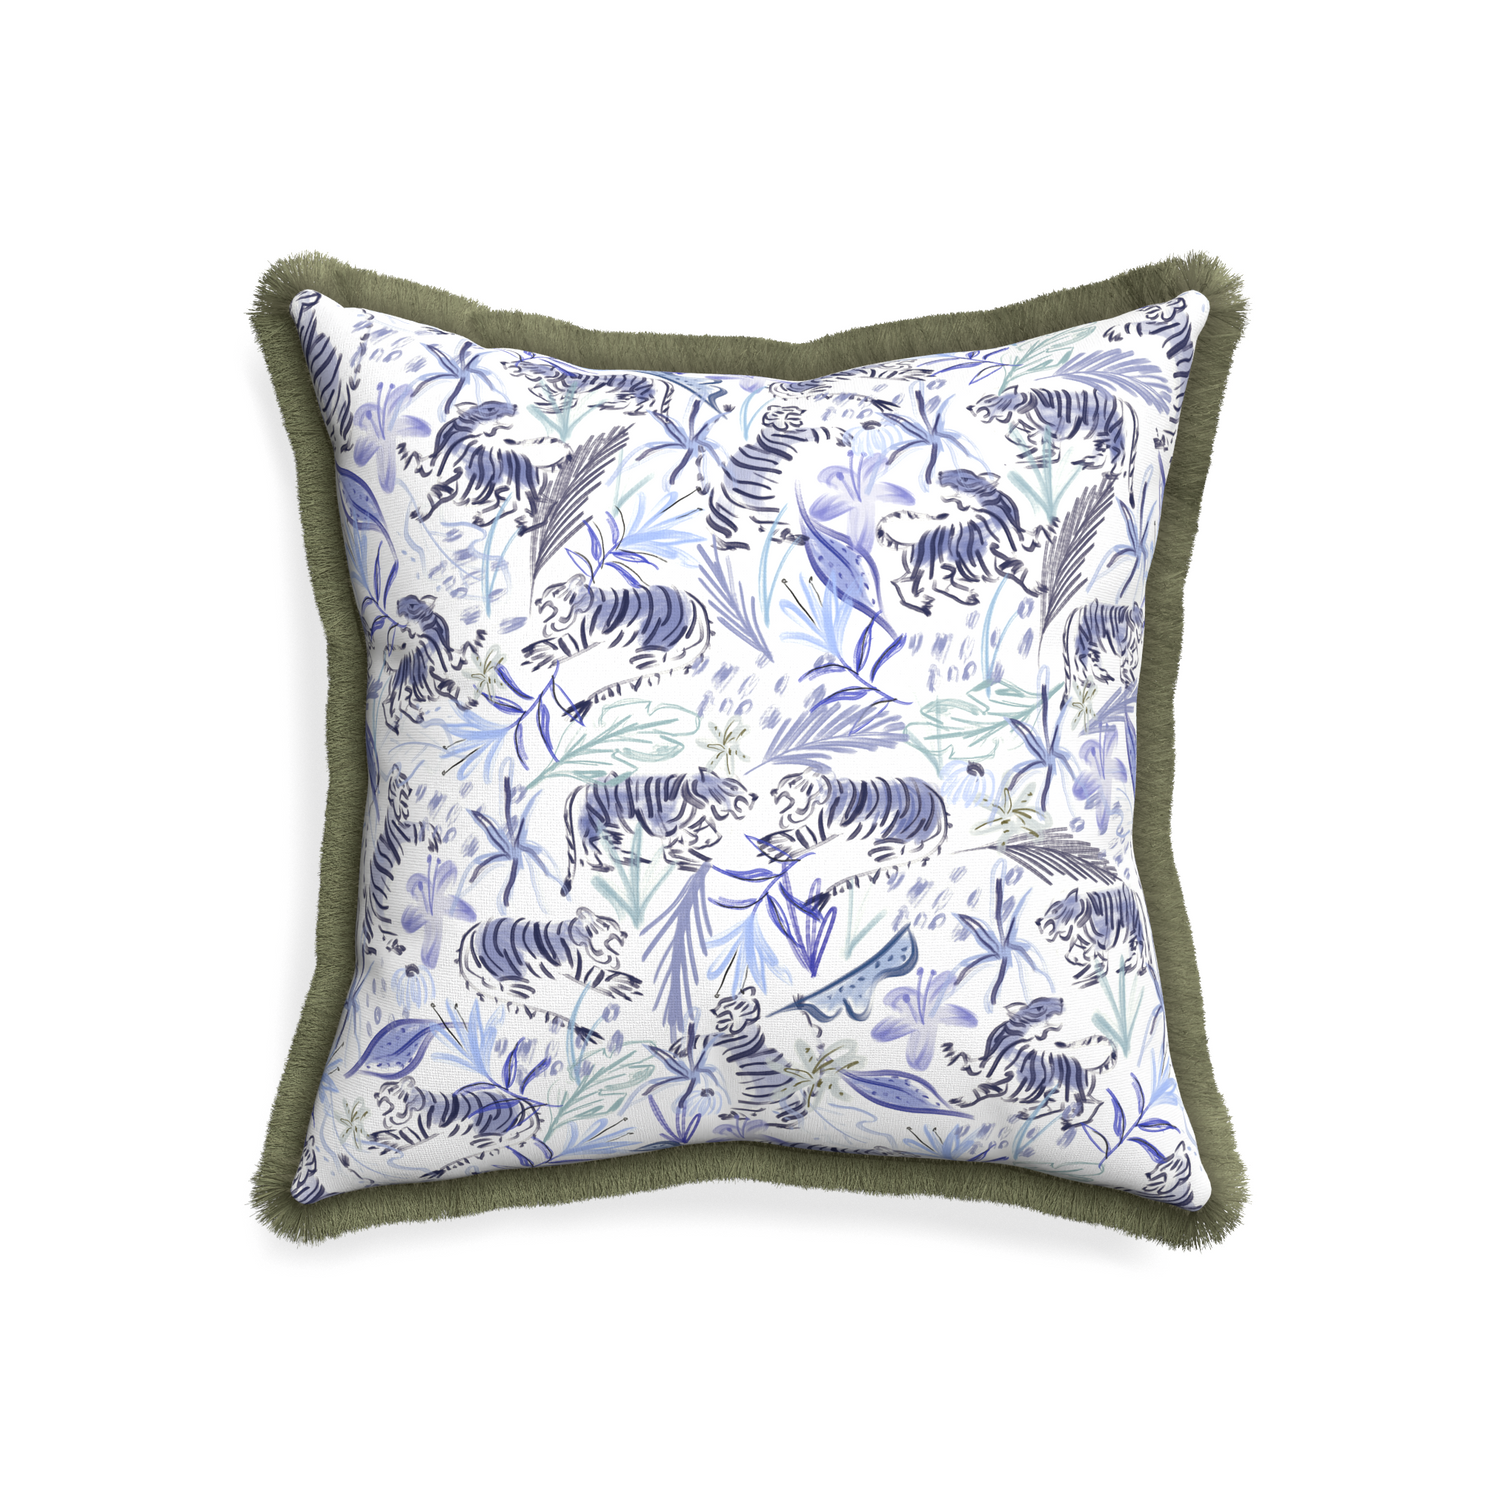 20-square frida blue custom blue with intricate tiger designpillow with sage fringe on white background